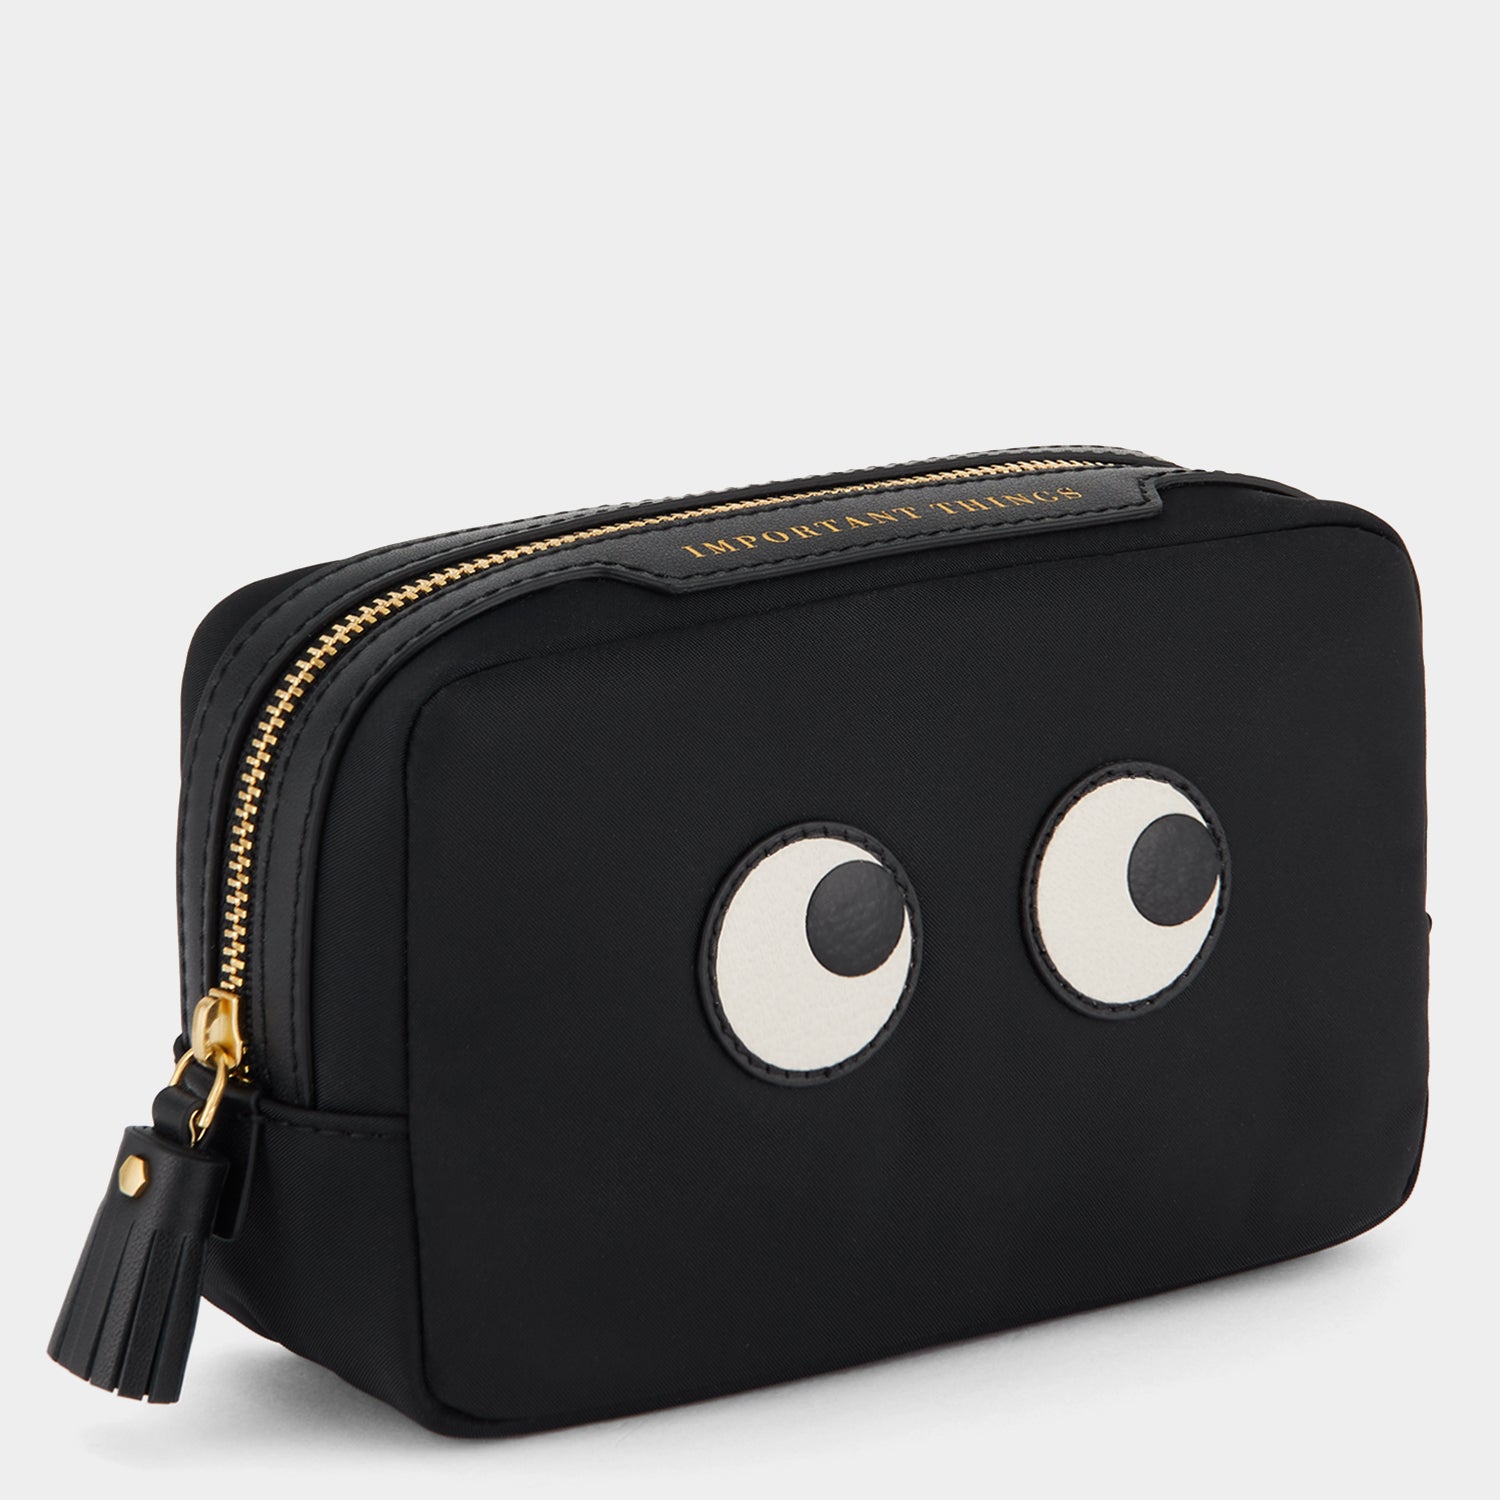 Eyes Important Things Pouch | Anya Hindmarch US